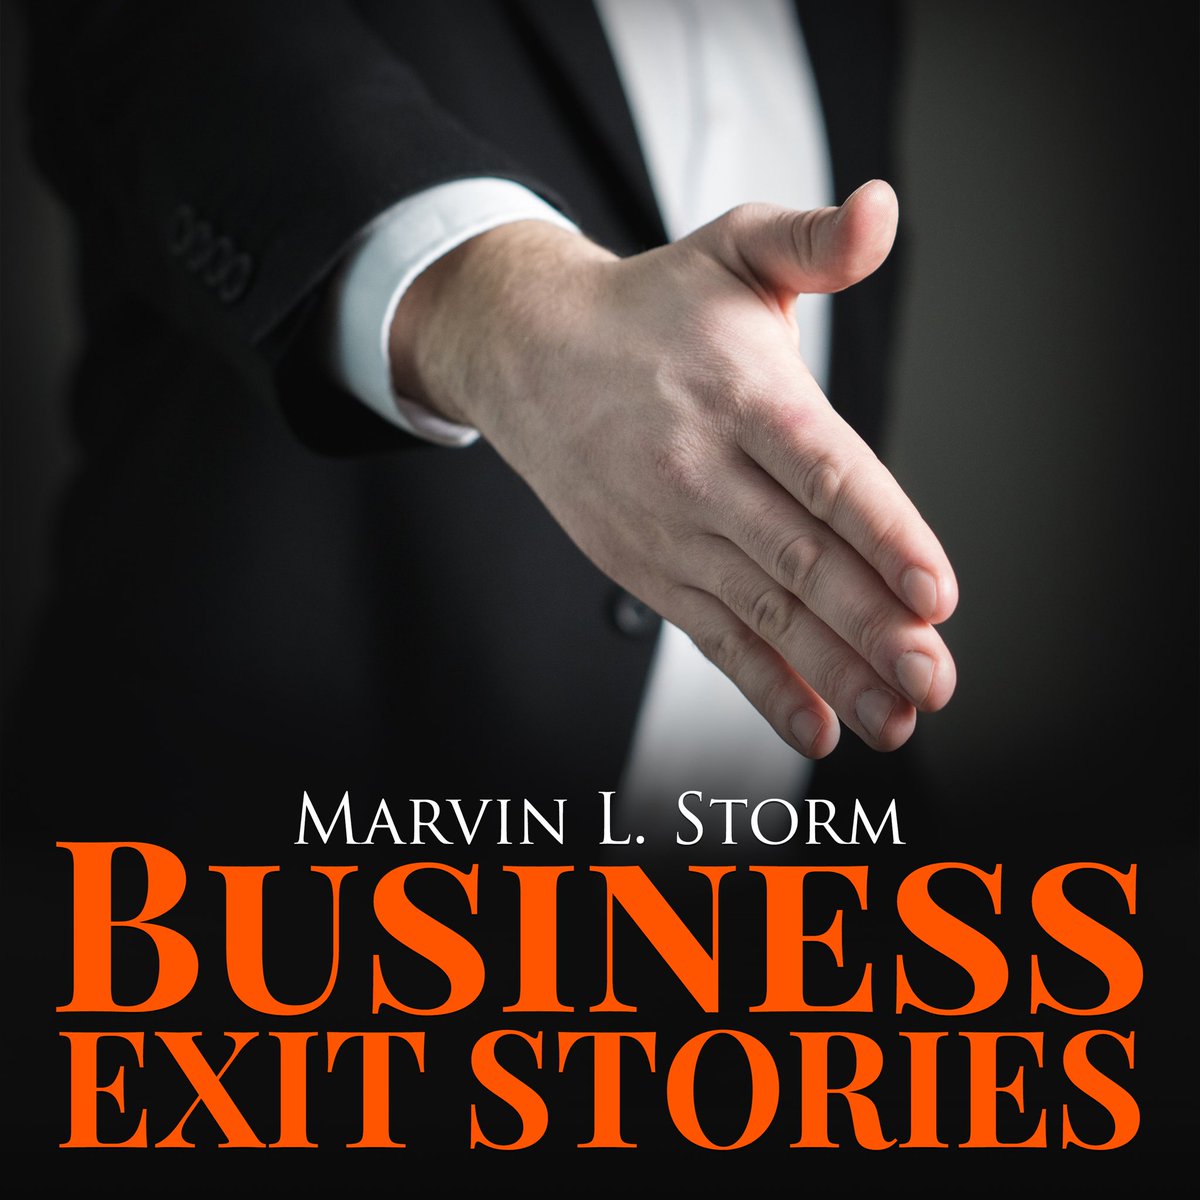 I recently had the pleasure of being interviewing by the business exit stories podcast hosted by @MarvinLStorm , I hope you enjoy some of my most memorable stories. Click below to listen.
 
businessexitstories.com/2020/07/13/a-b…
#businesssales #businesstransactions #Cressvdigliopa #podcast